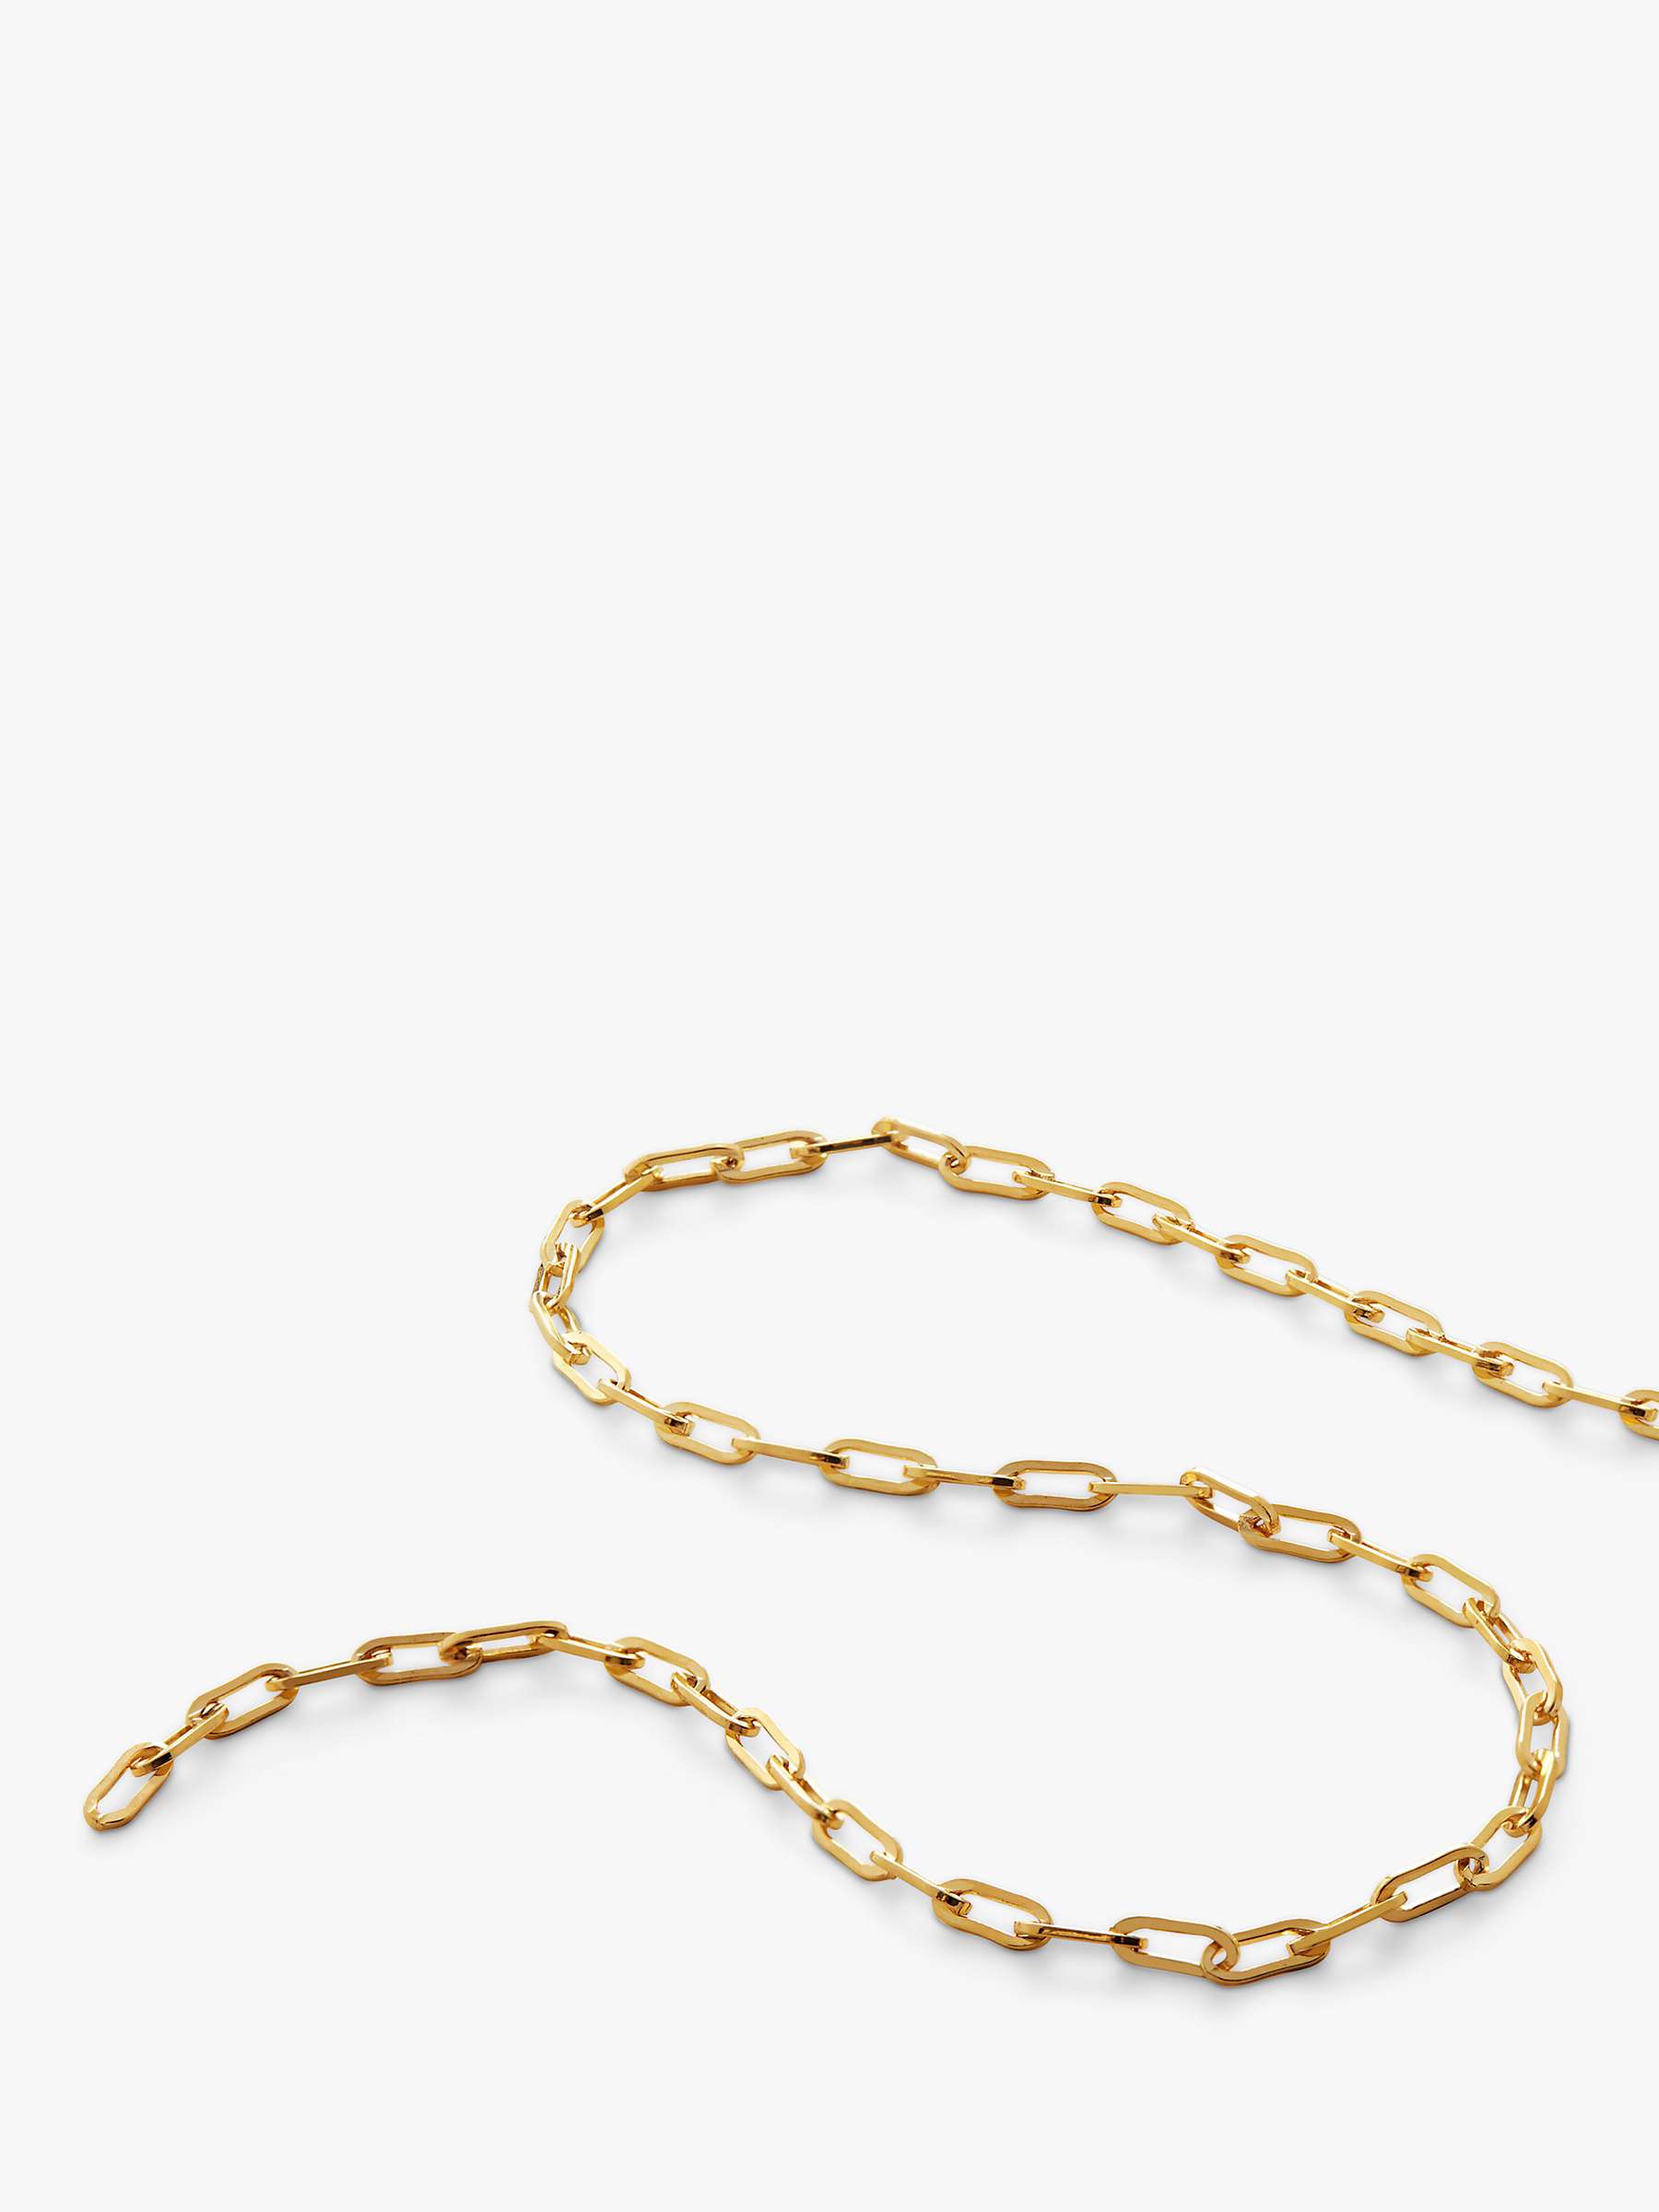 Buy Monica Vinader Paperclip Chain Necklace Online at johnlewis.com